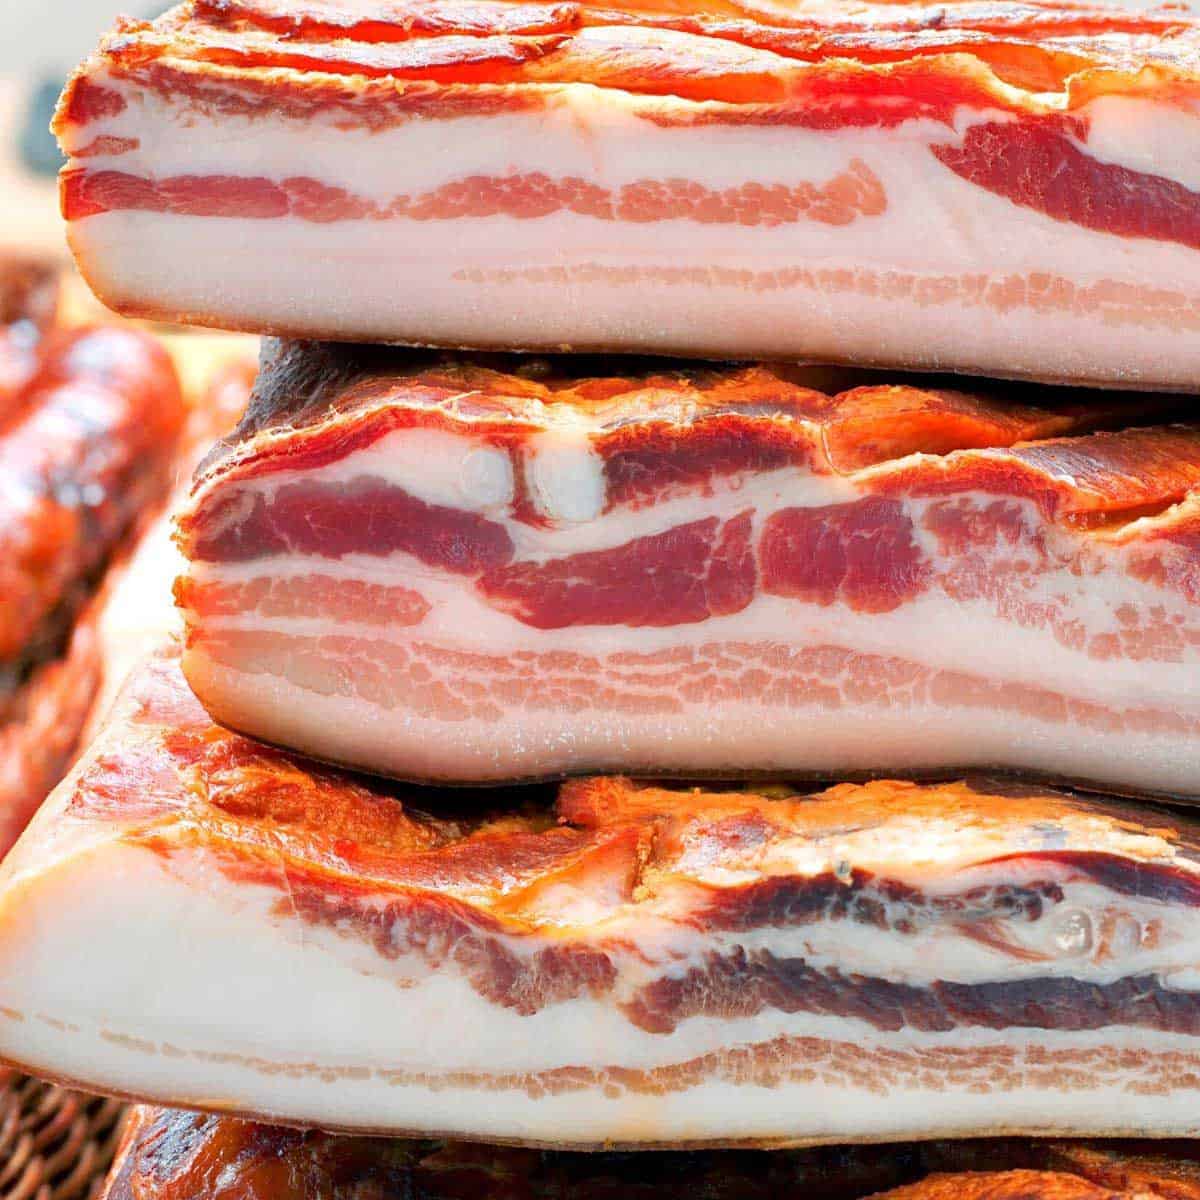 These Are The Best Bacons You Can Buy